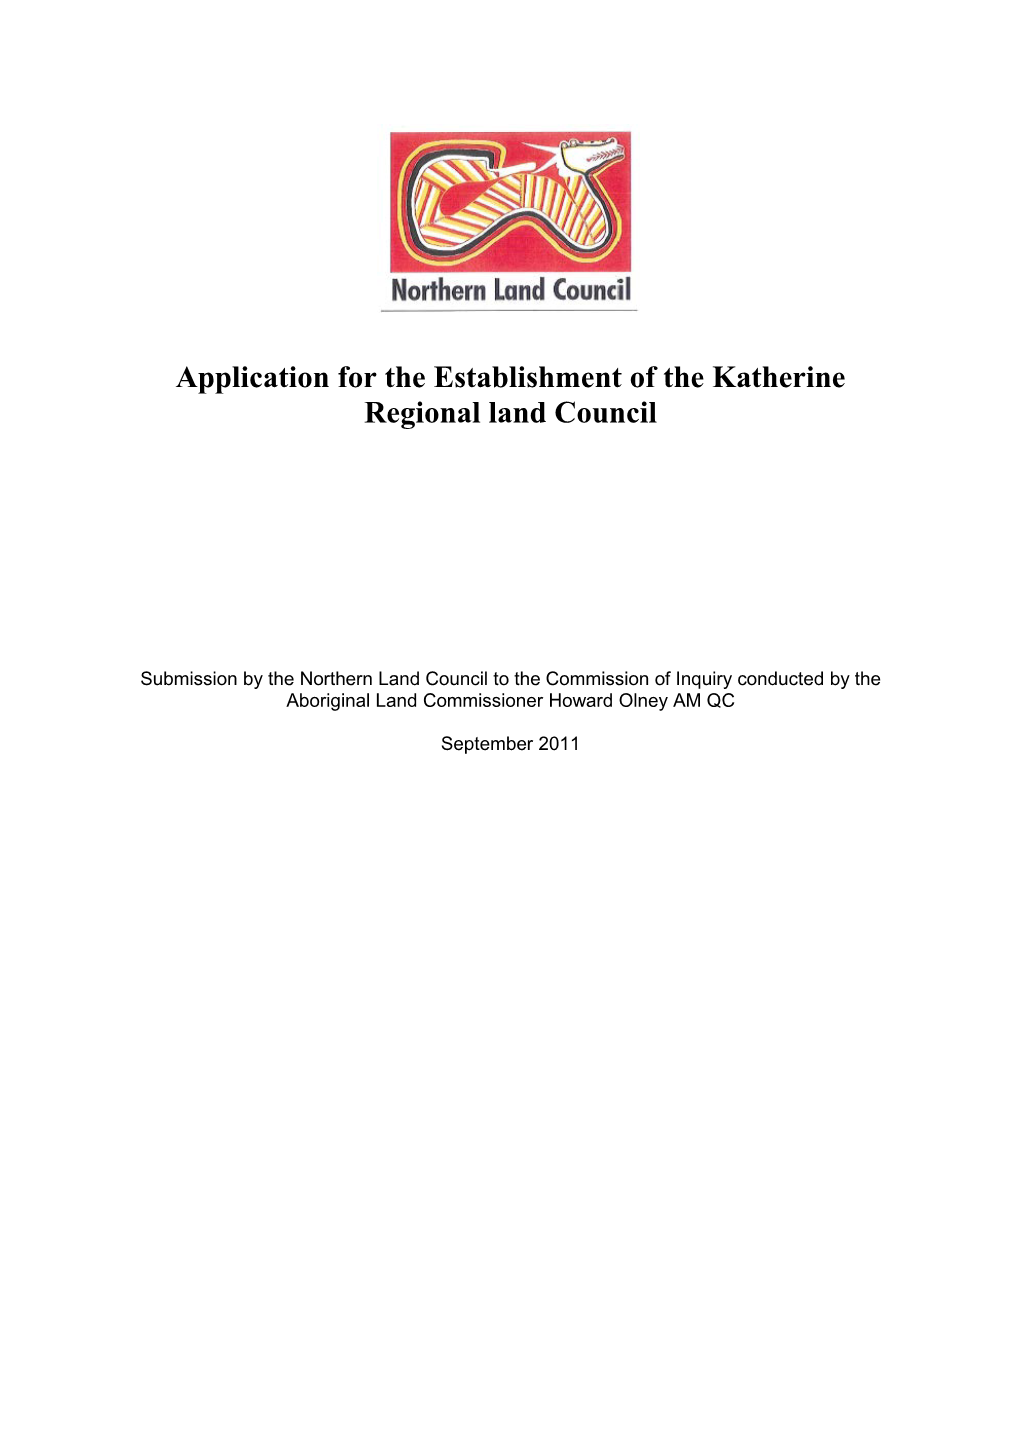 Application for the Establishment of the Katherine Regional Land Council